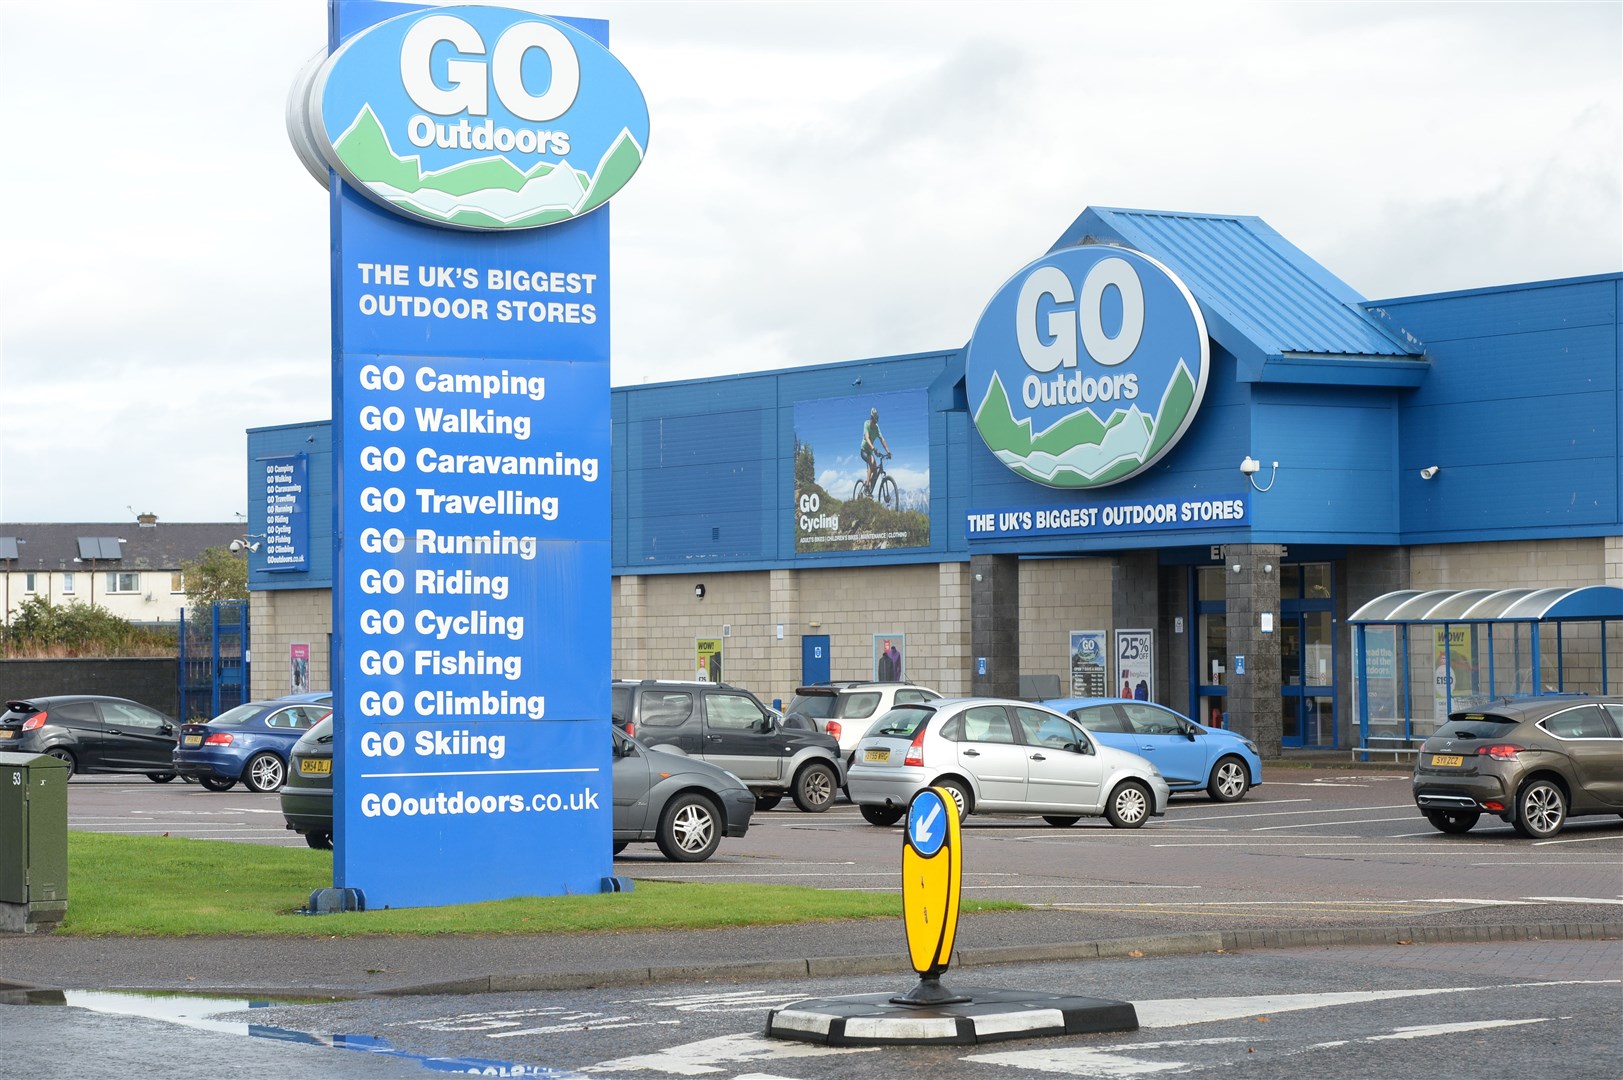 Go Outdoors at the Telford Retail Park in Inverness.